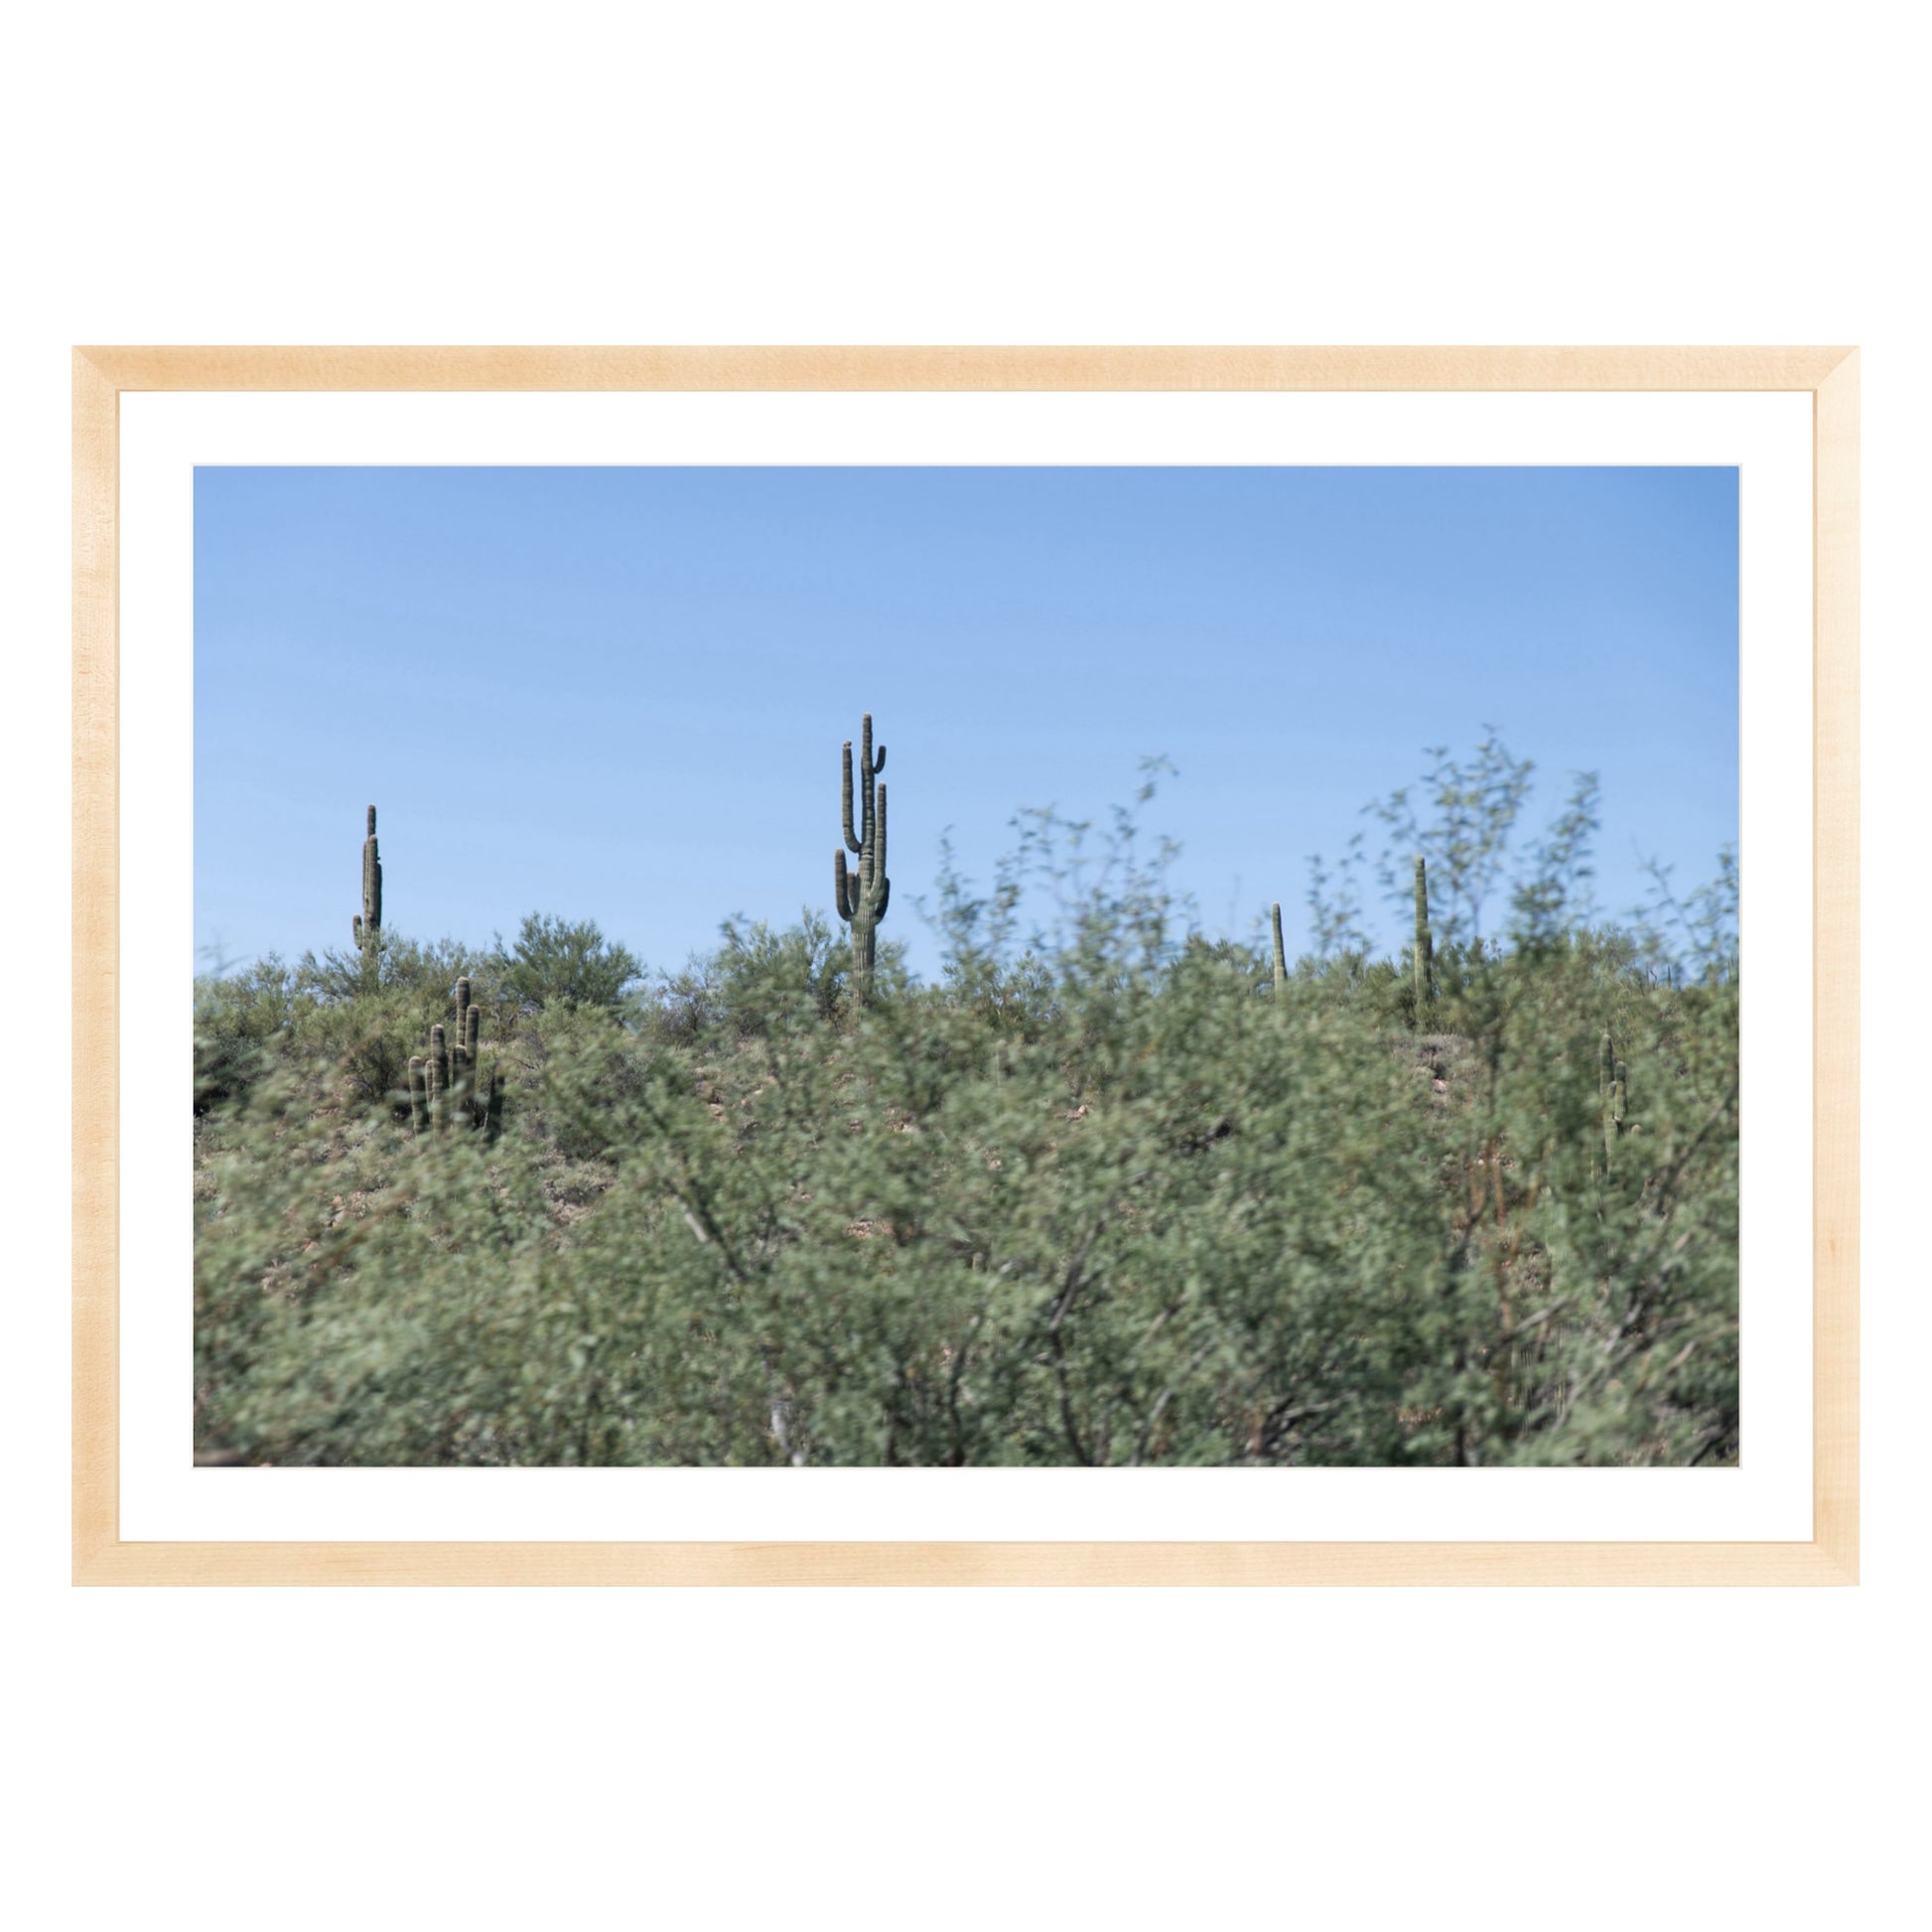 Photograph of field of cactus in Sedona, Arizona framed in natural wood with white mat